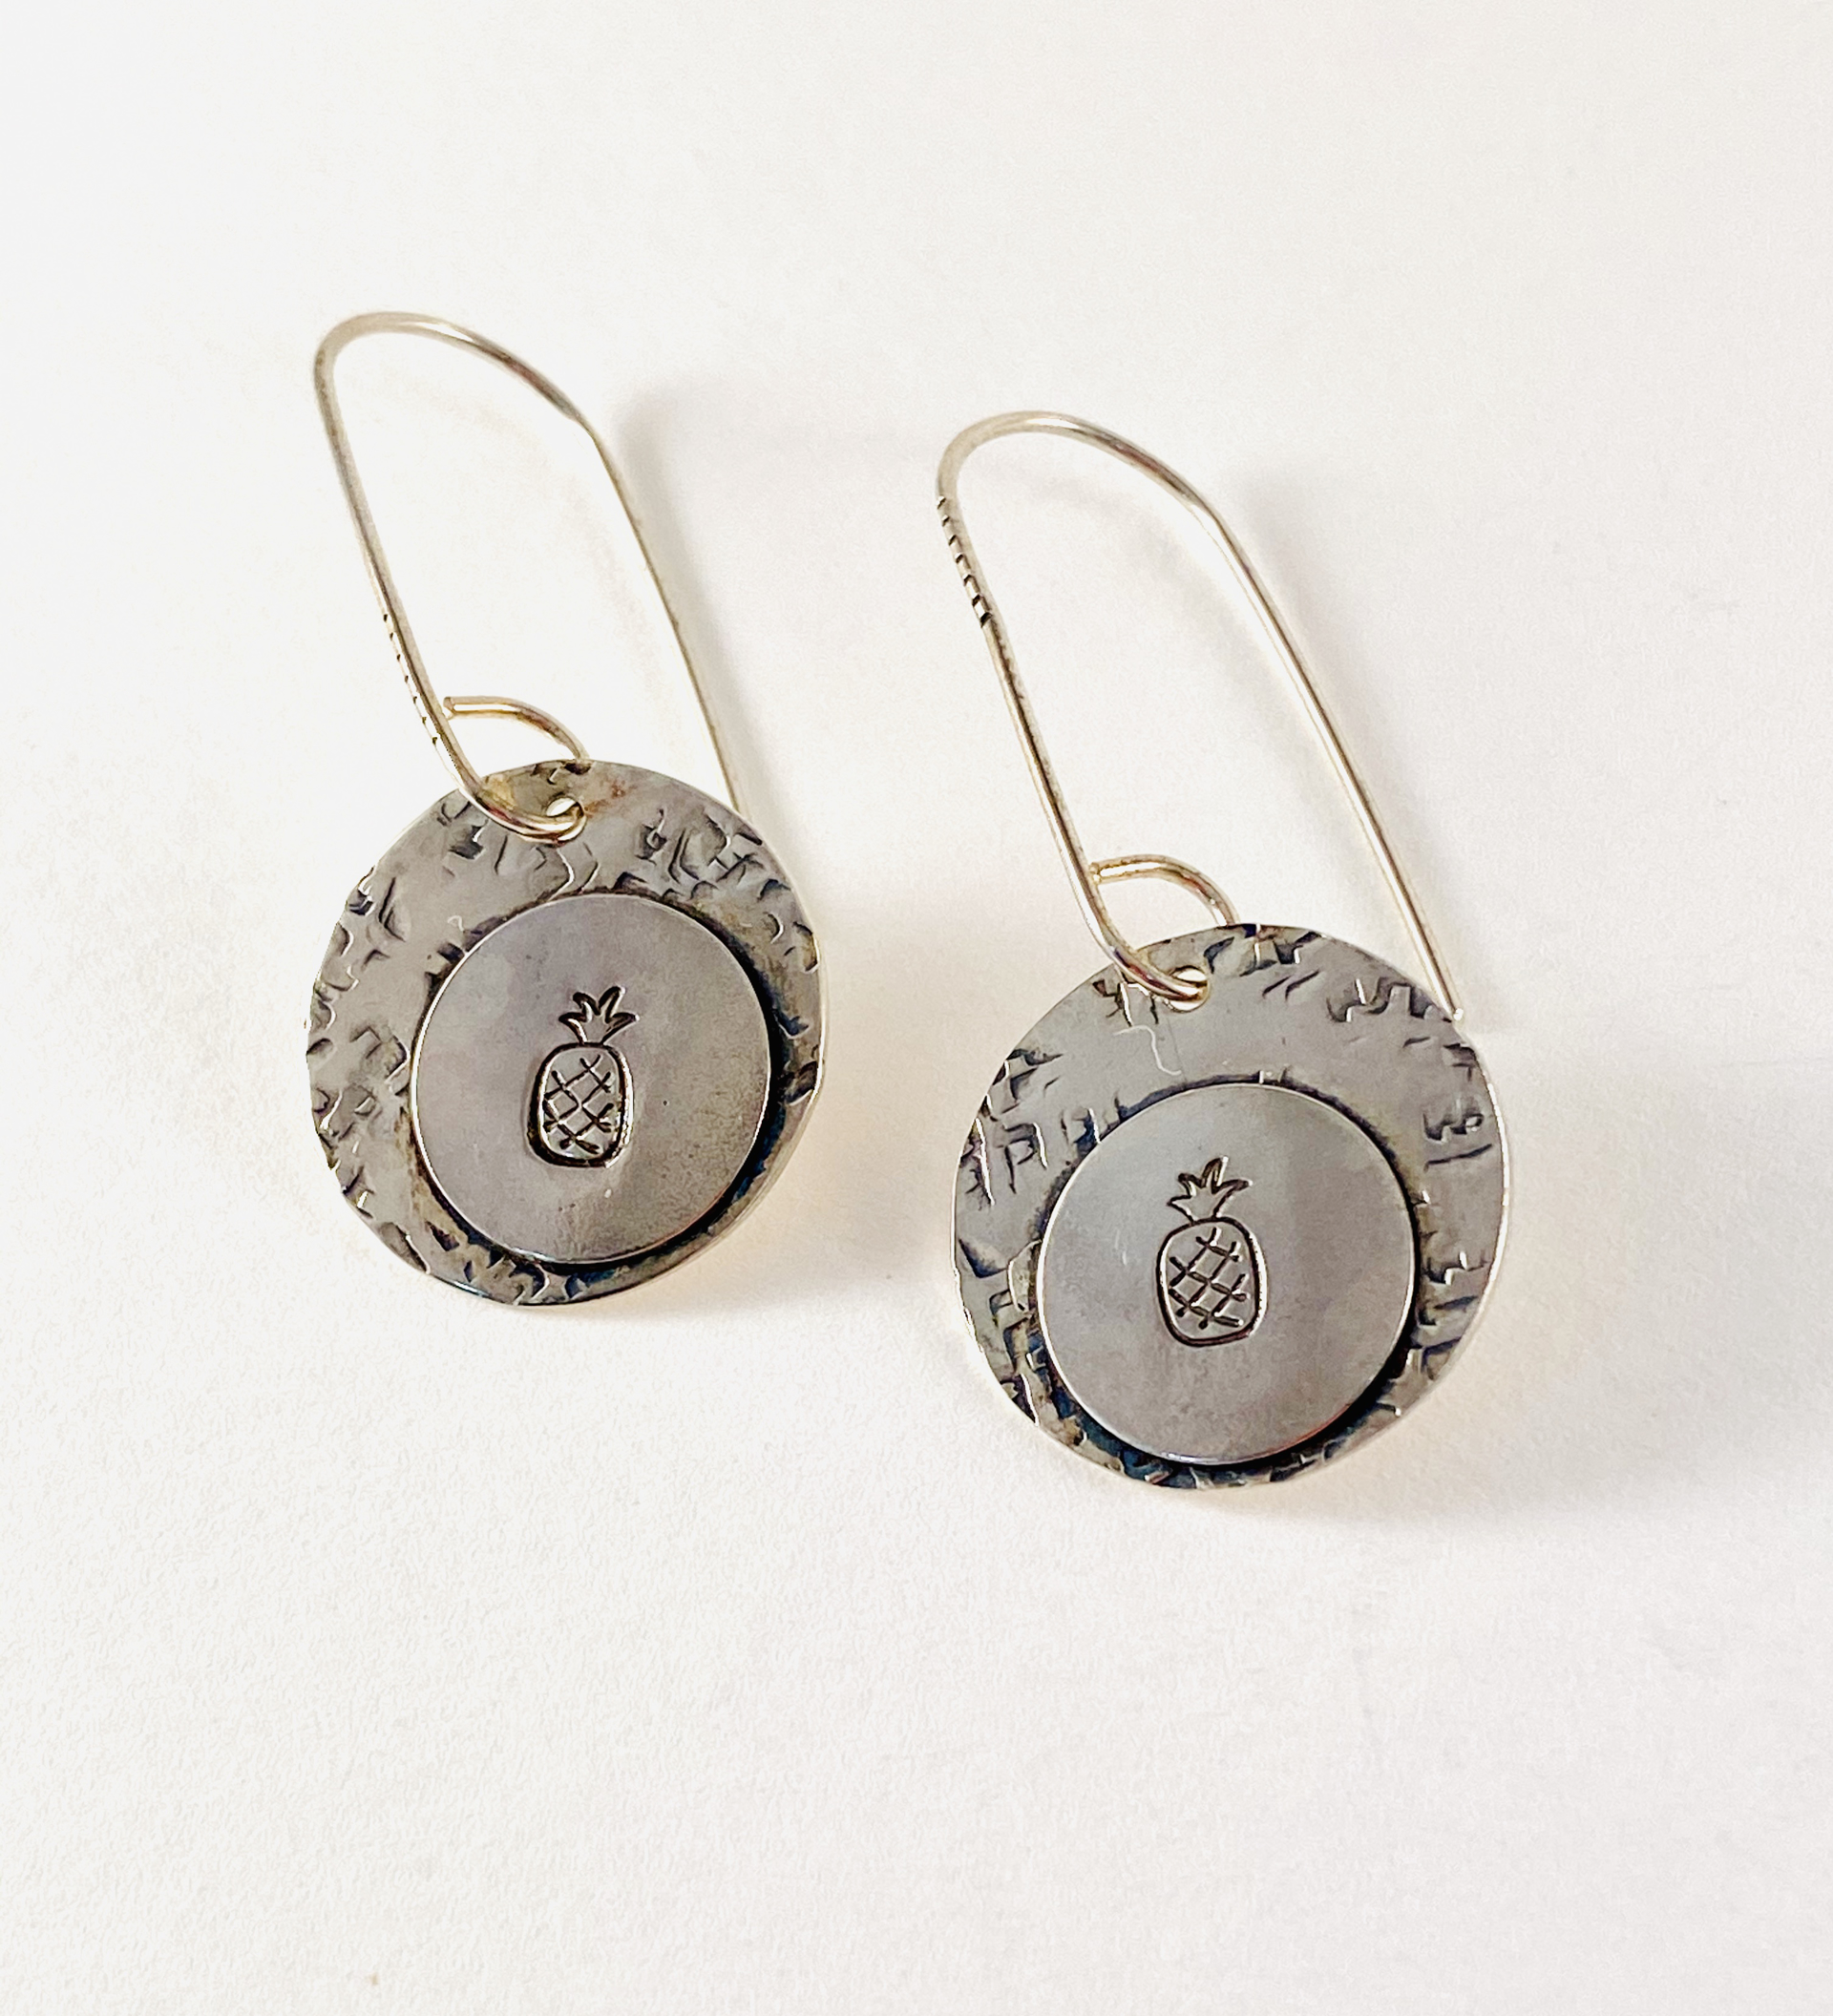 Silver Pineapple Dbl Stamp Earrings #9 by Shelby Lee - jewelry